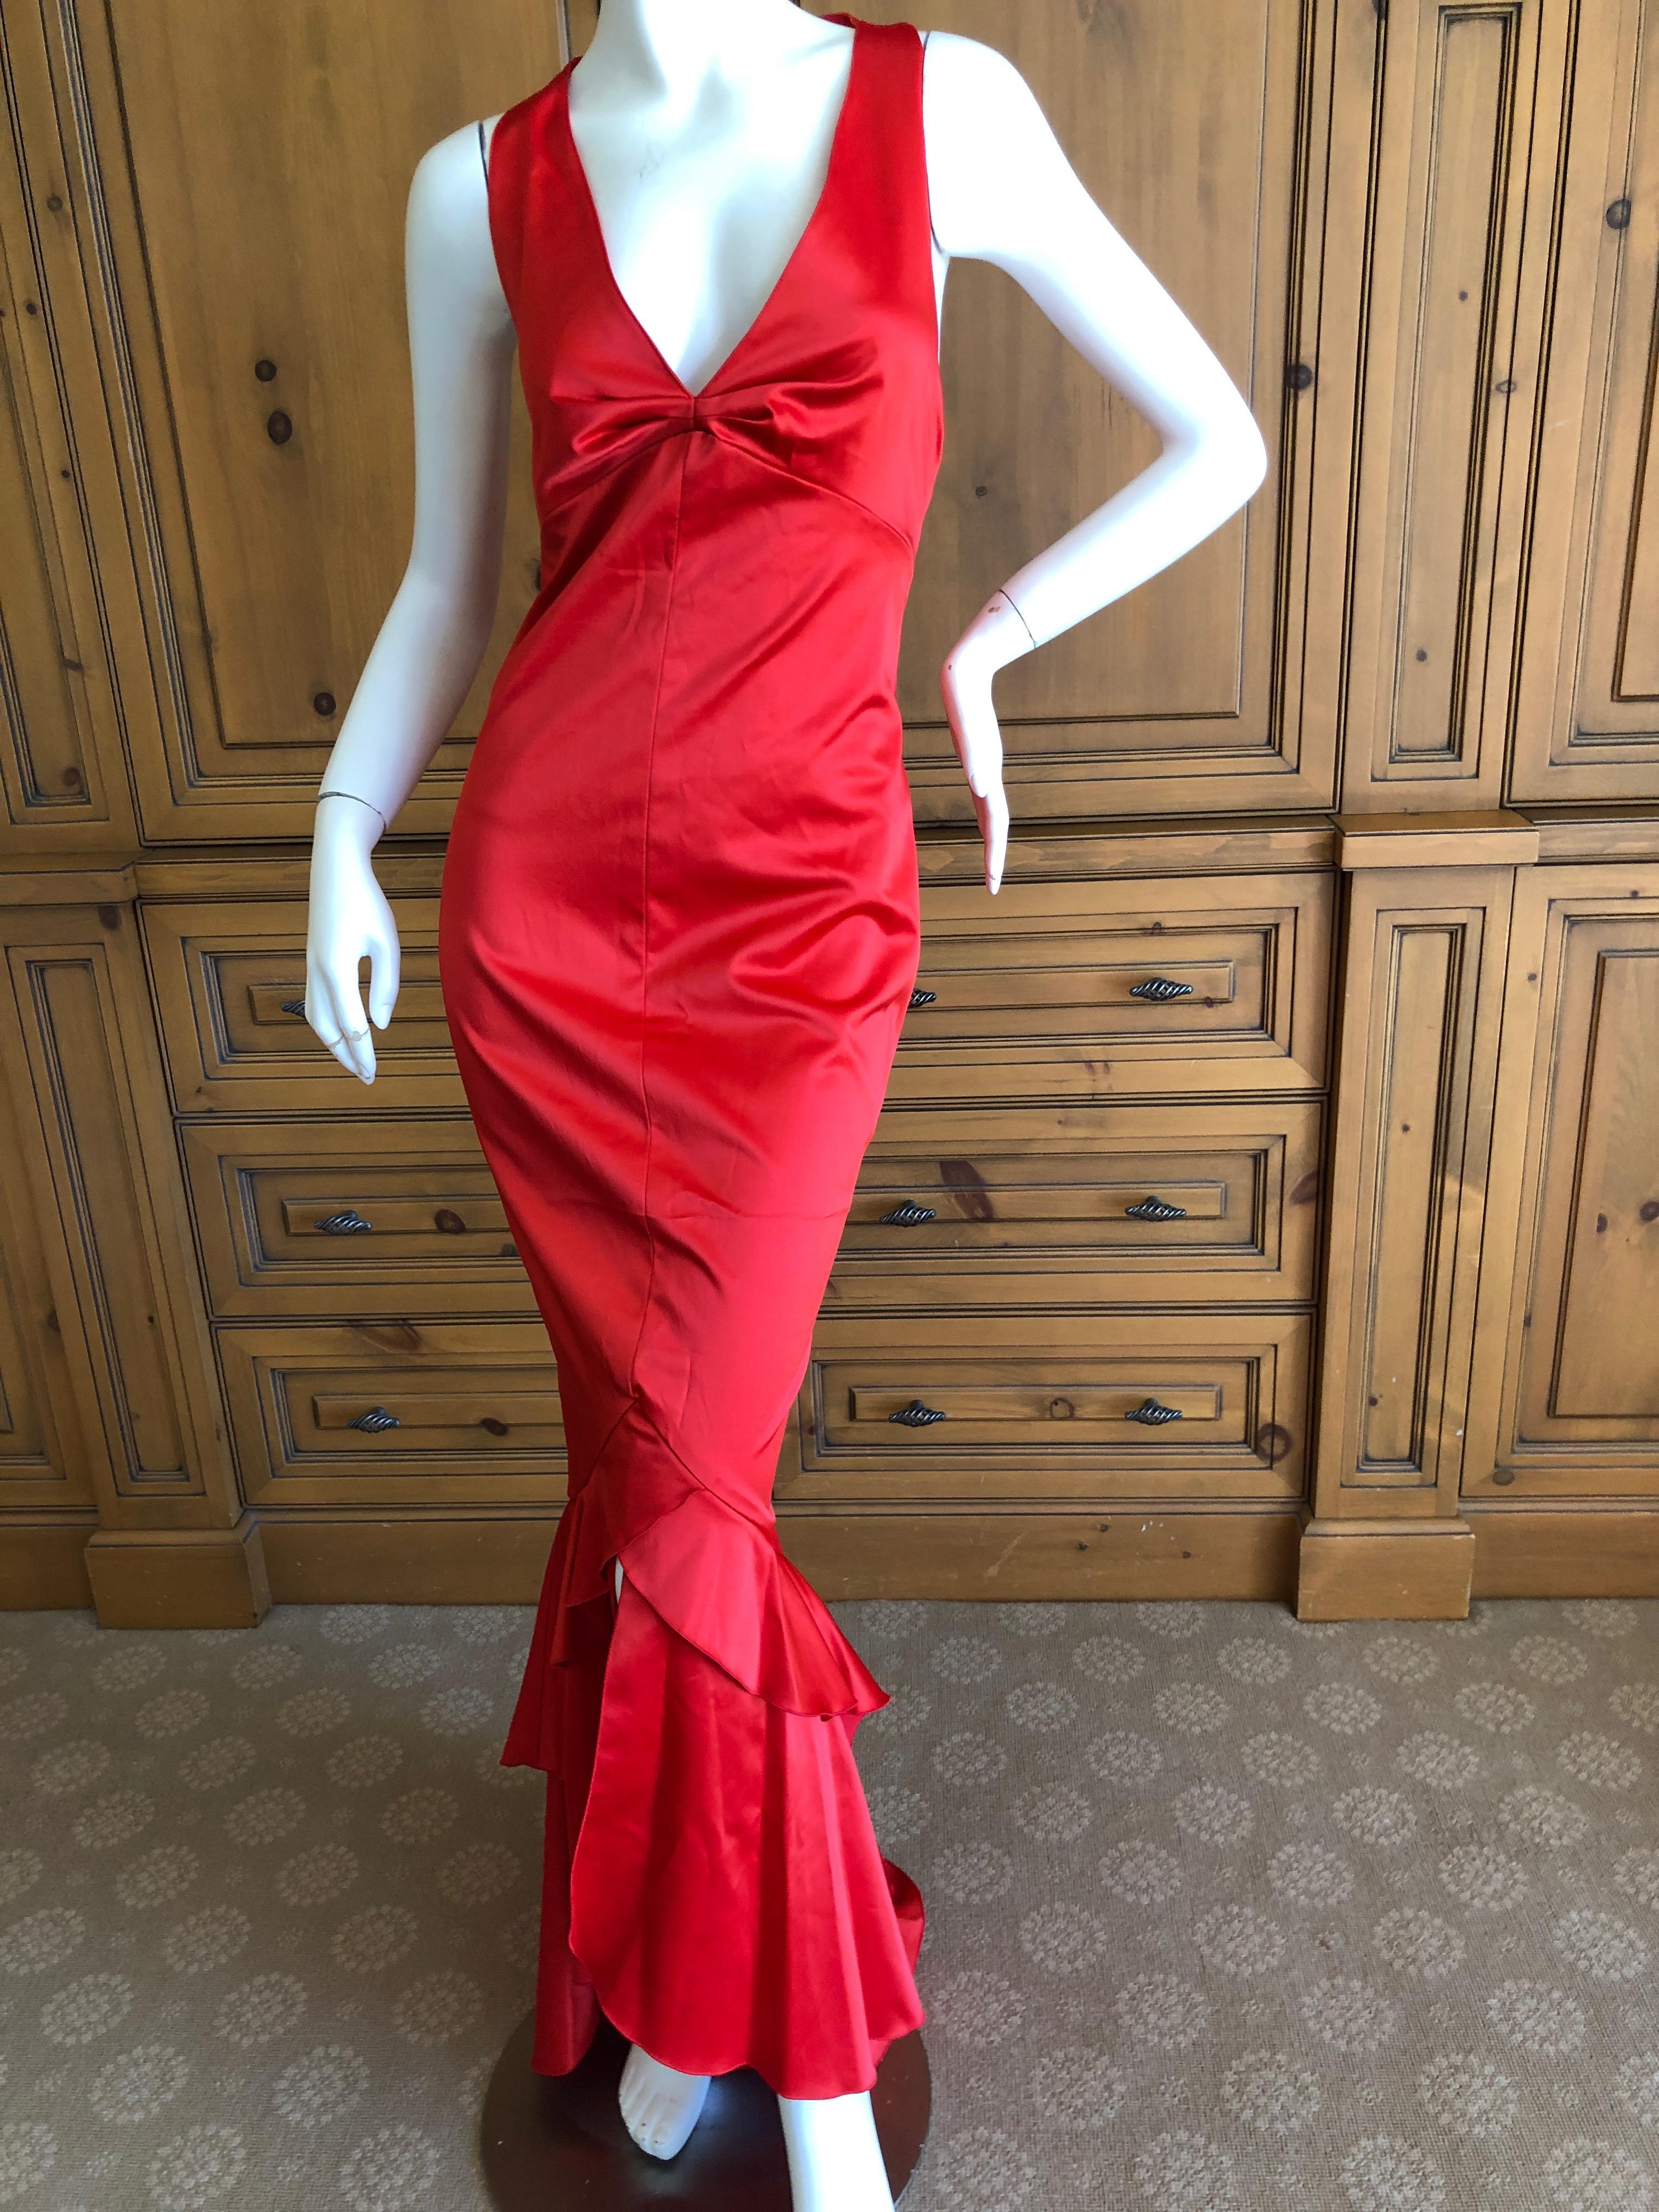 Women's Karl Lagerfeld 1980's Red Evening Dress with Matching Jacket Lagerfeld Gallery